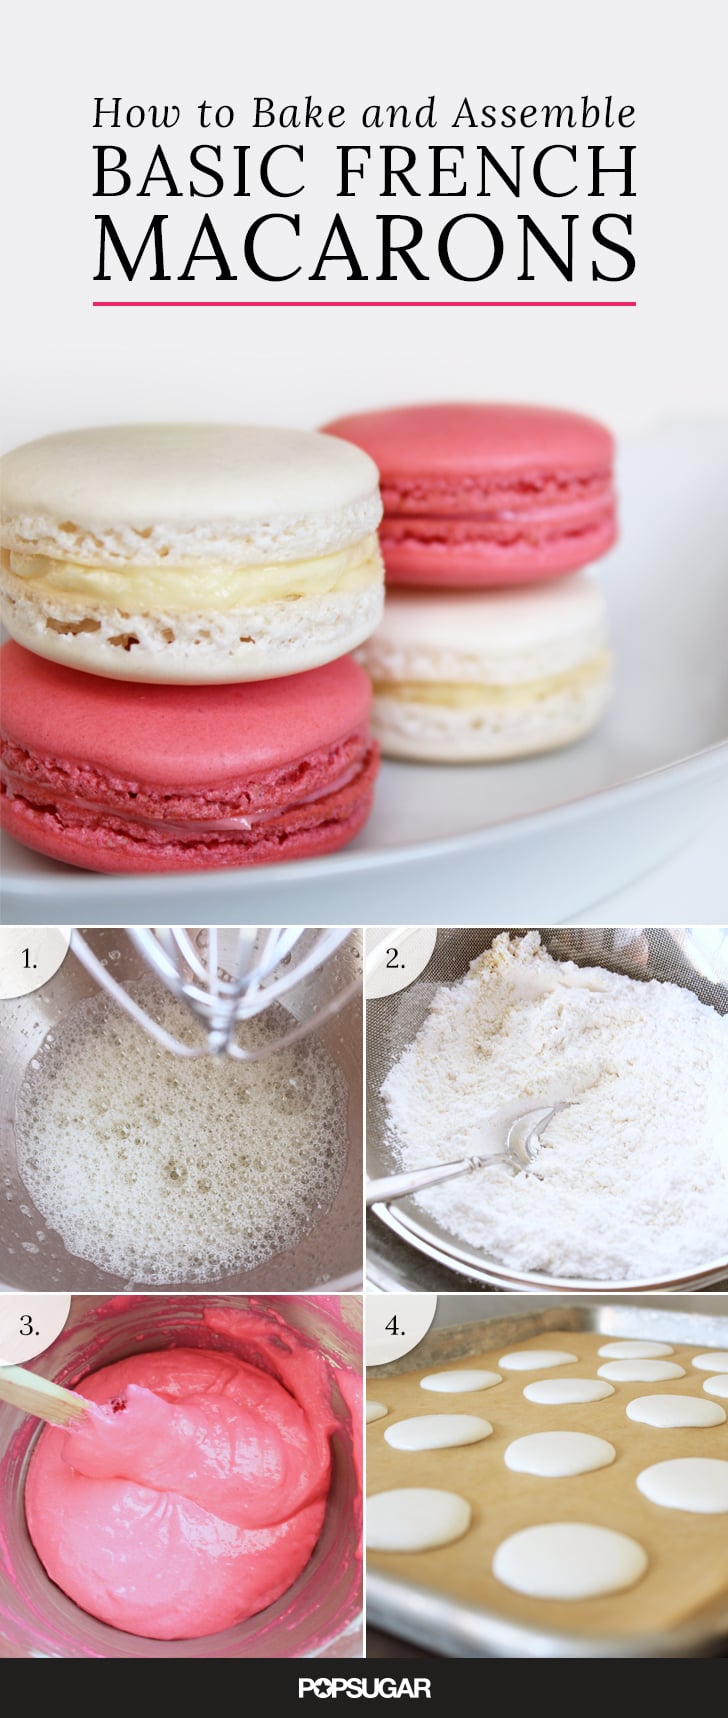 Basic French Macarons With Buttercream Filling